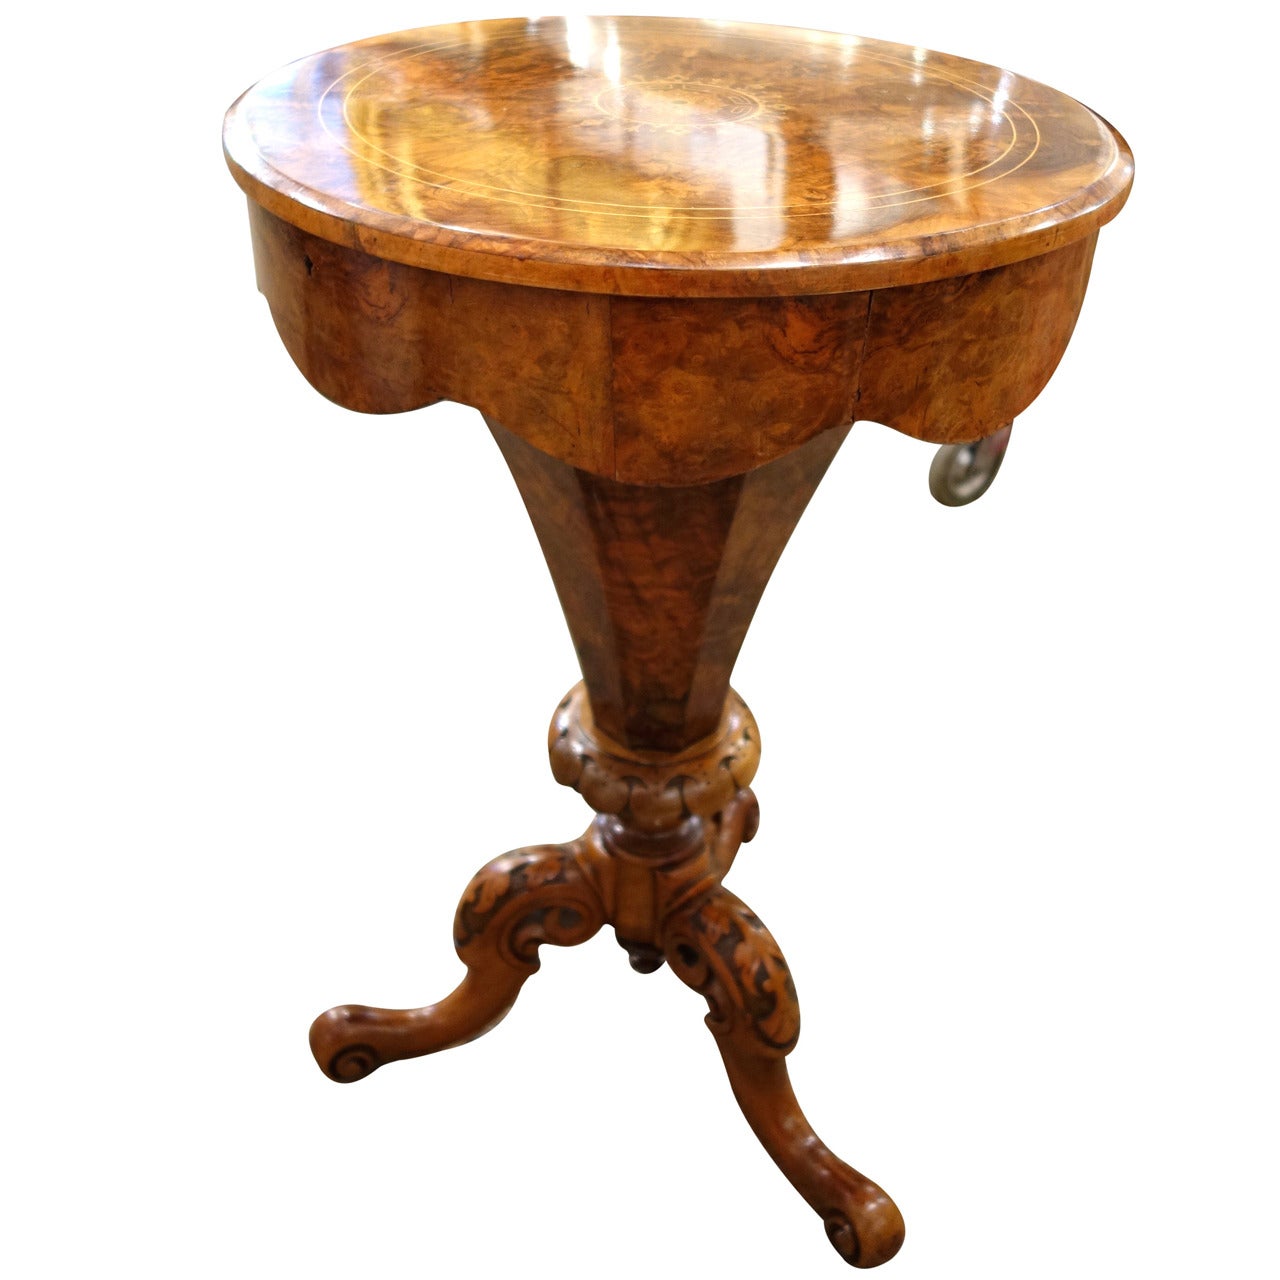 Burl Wood Continental 19th Century Sewing Table